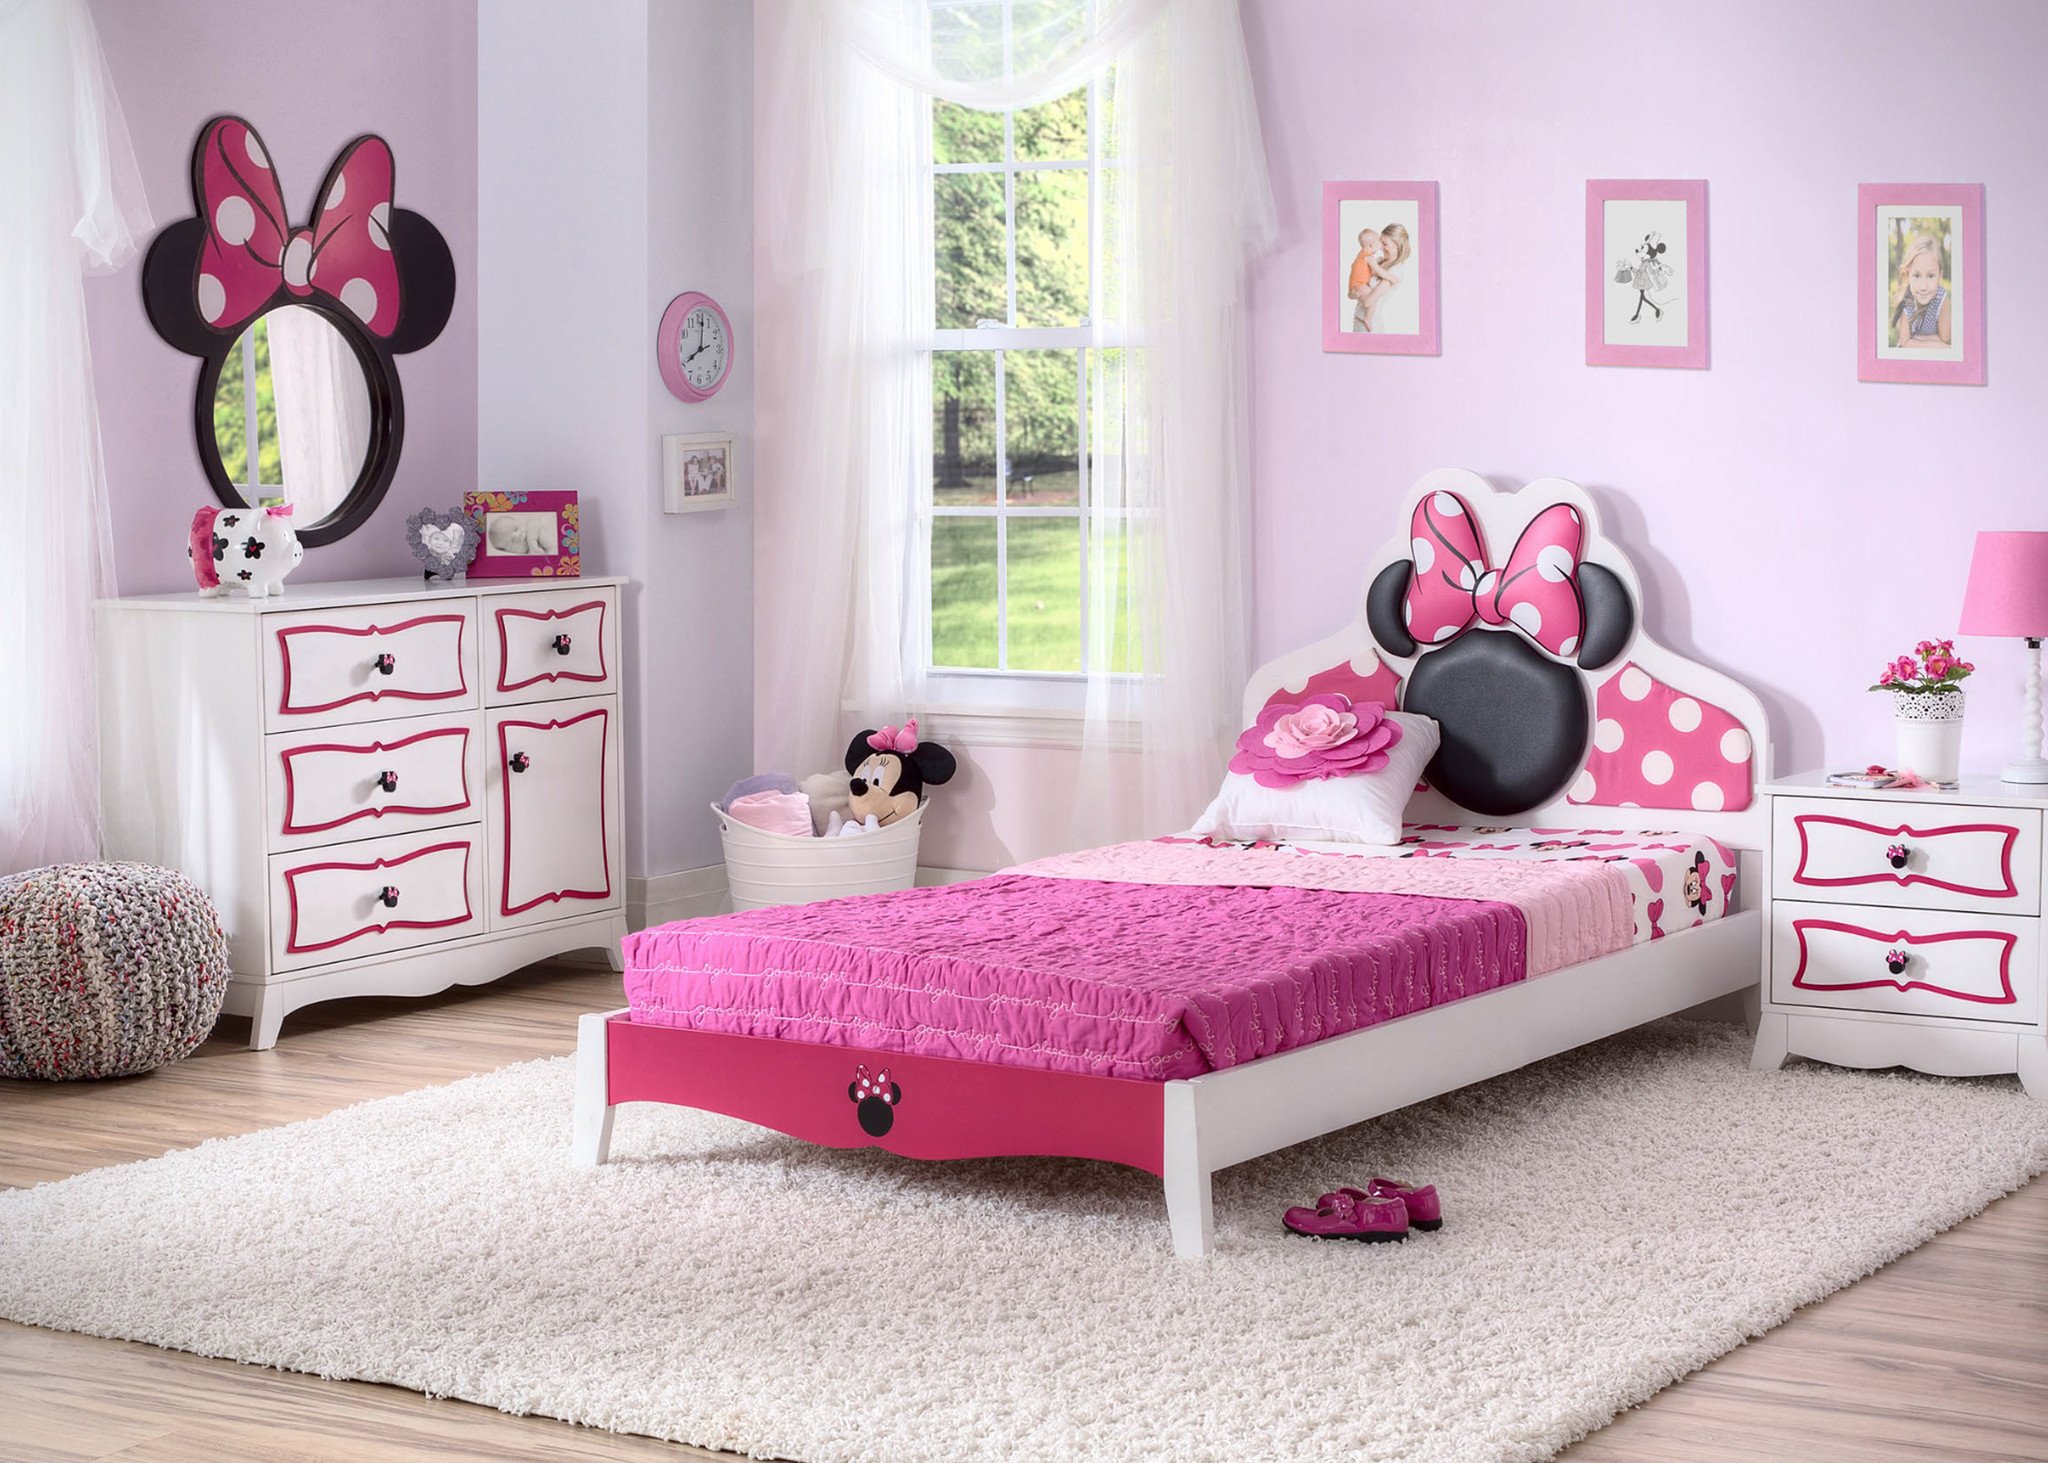 Minnie Mouse Bedroom Furniture Elegant Take A Look at these Awesome Minnie Mouse Bedroom Items